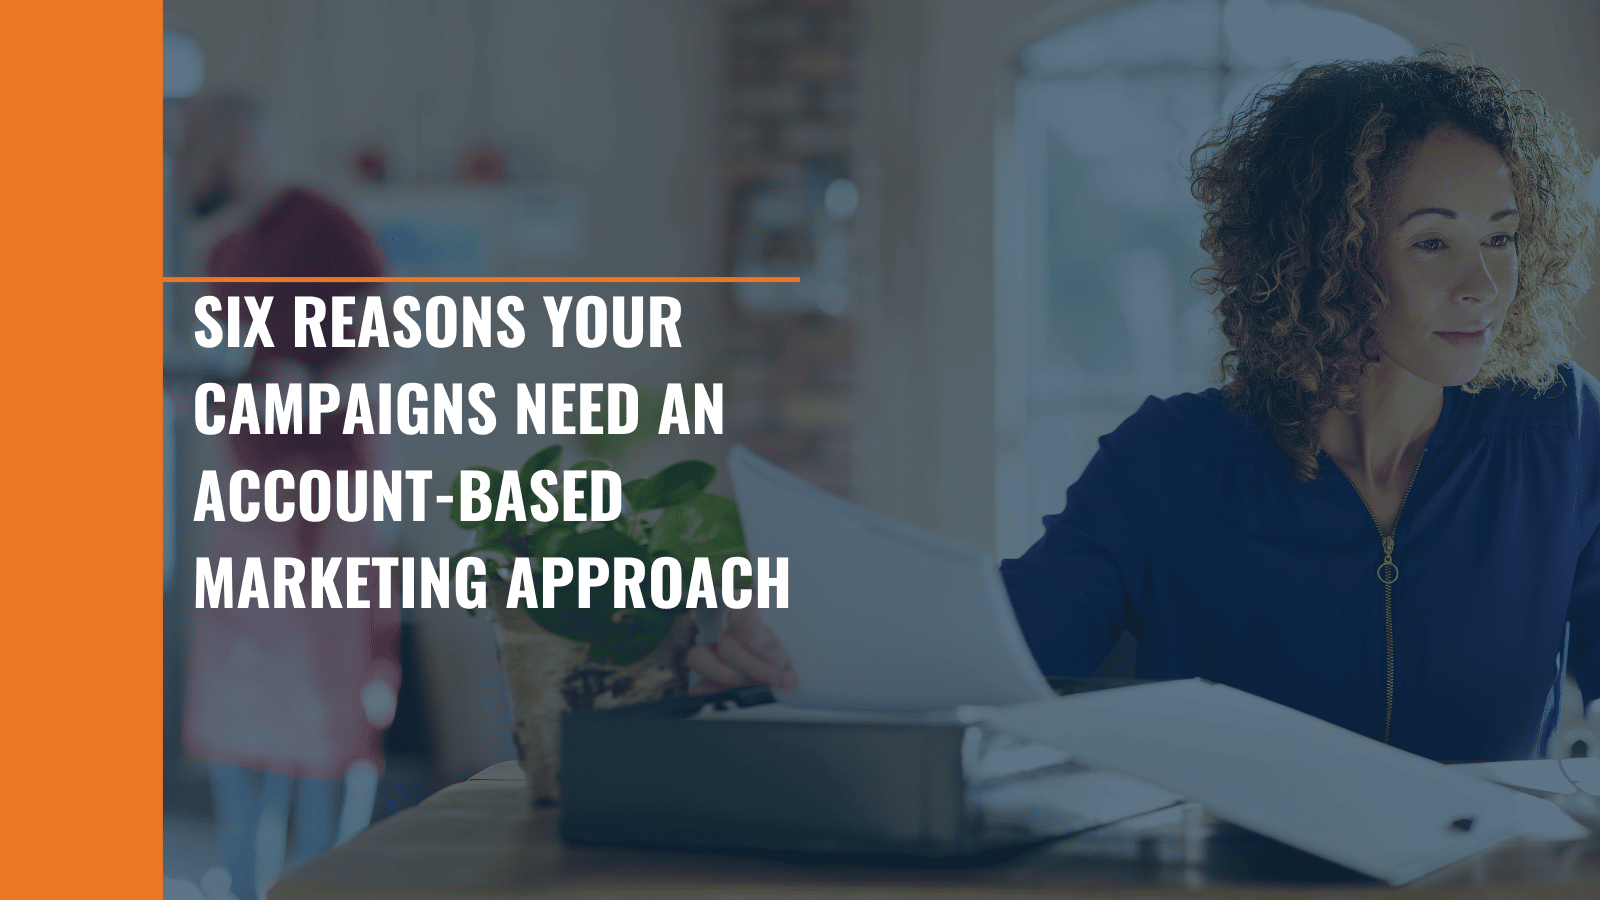 Six Reasons Your Campaigns Need an Account-Based Marketing Approach